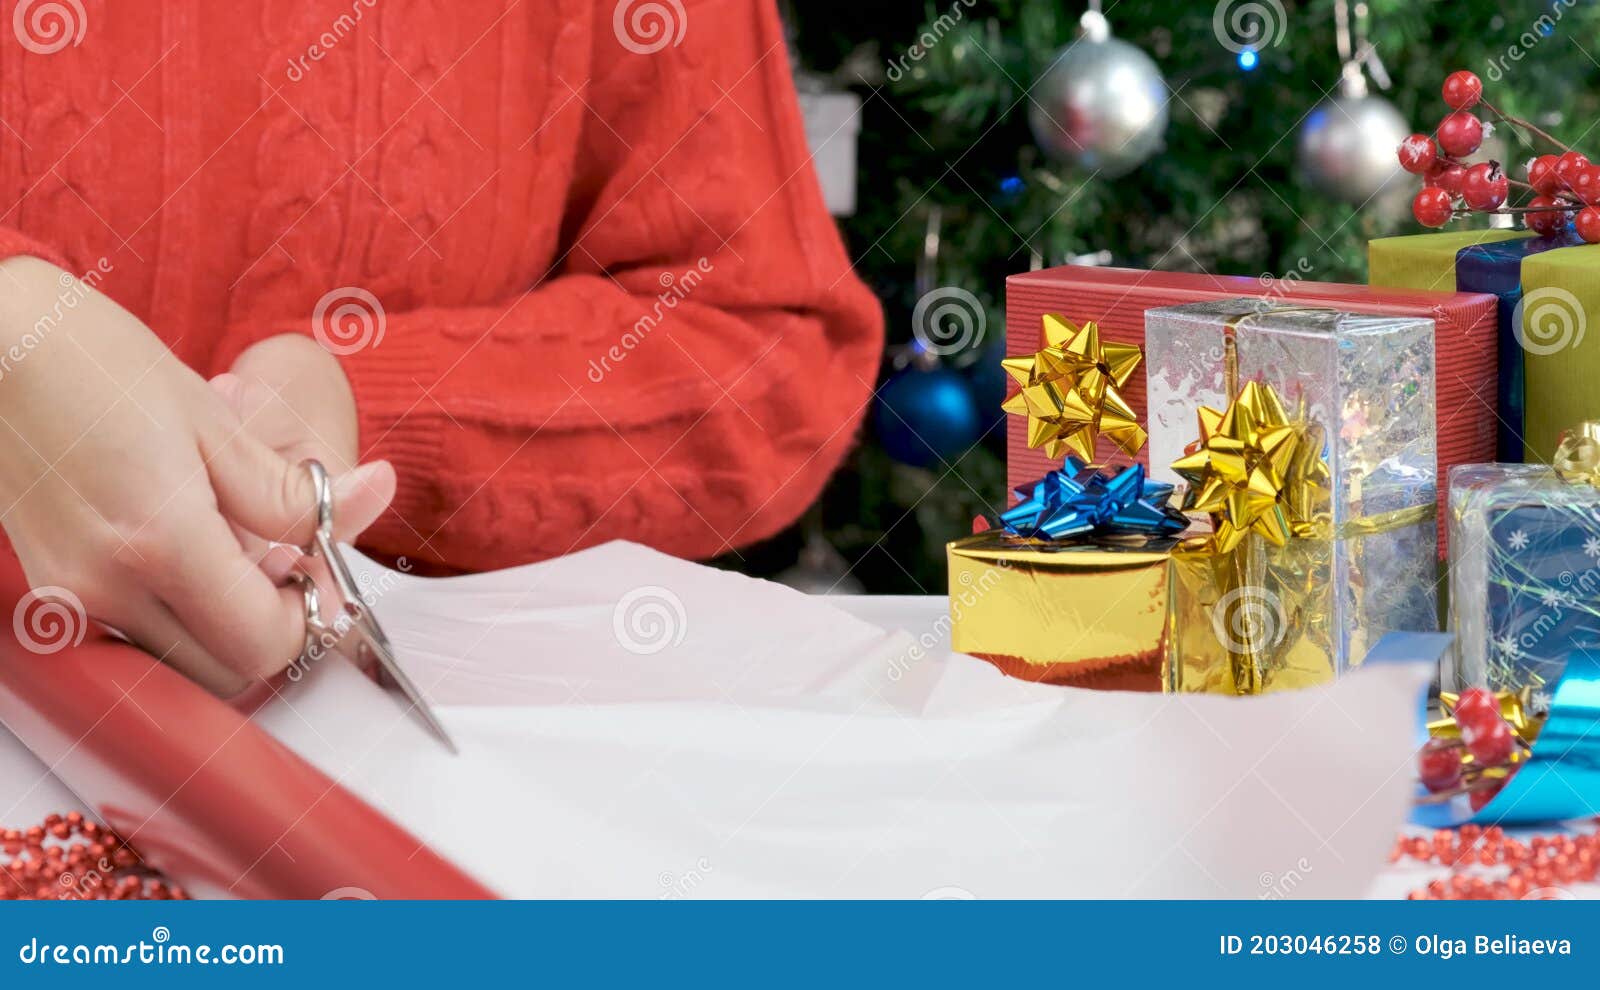 https://thumbs.dreamstime.com/z/young-woman-s-hands-cutting-red-wrapping-paper-scissors-decorated-gifts-festive-packaging-gift-boxes-christmas-203046258.jpg